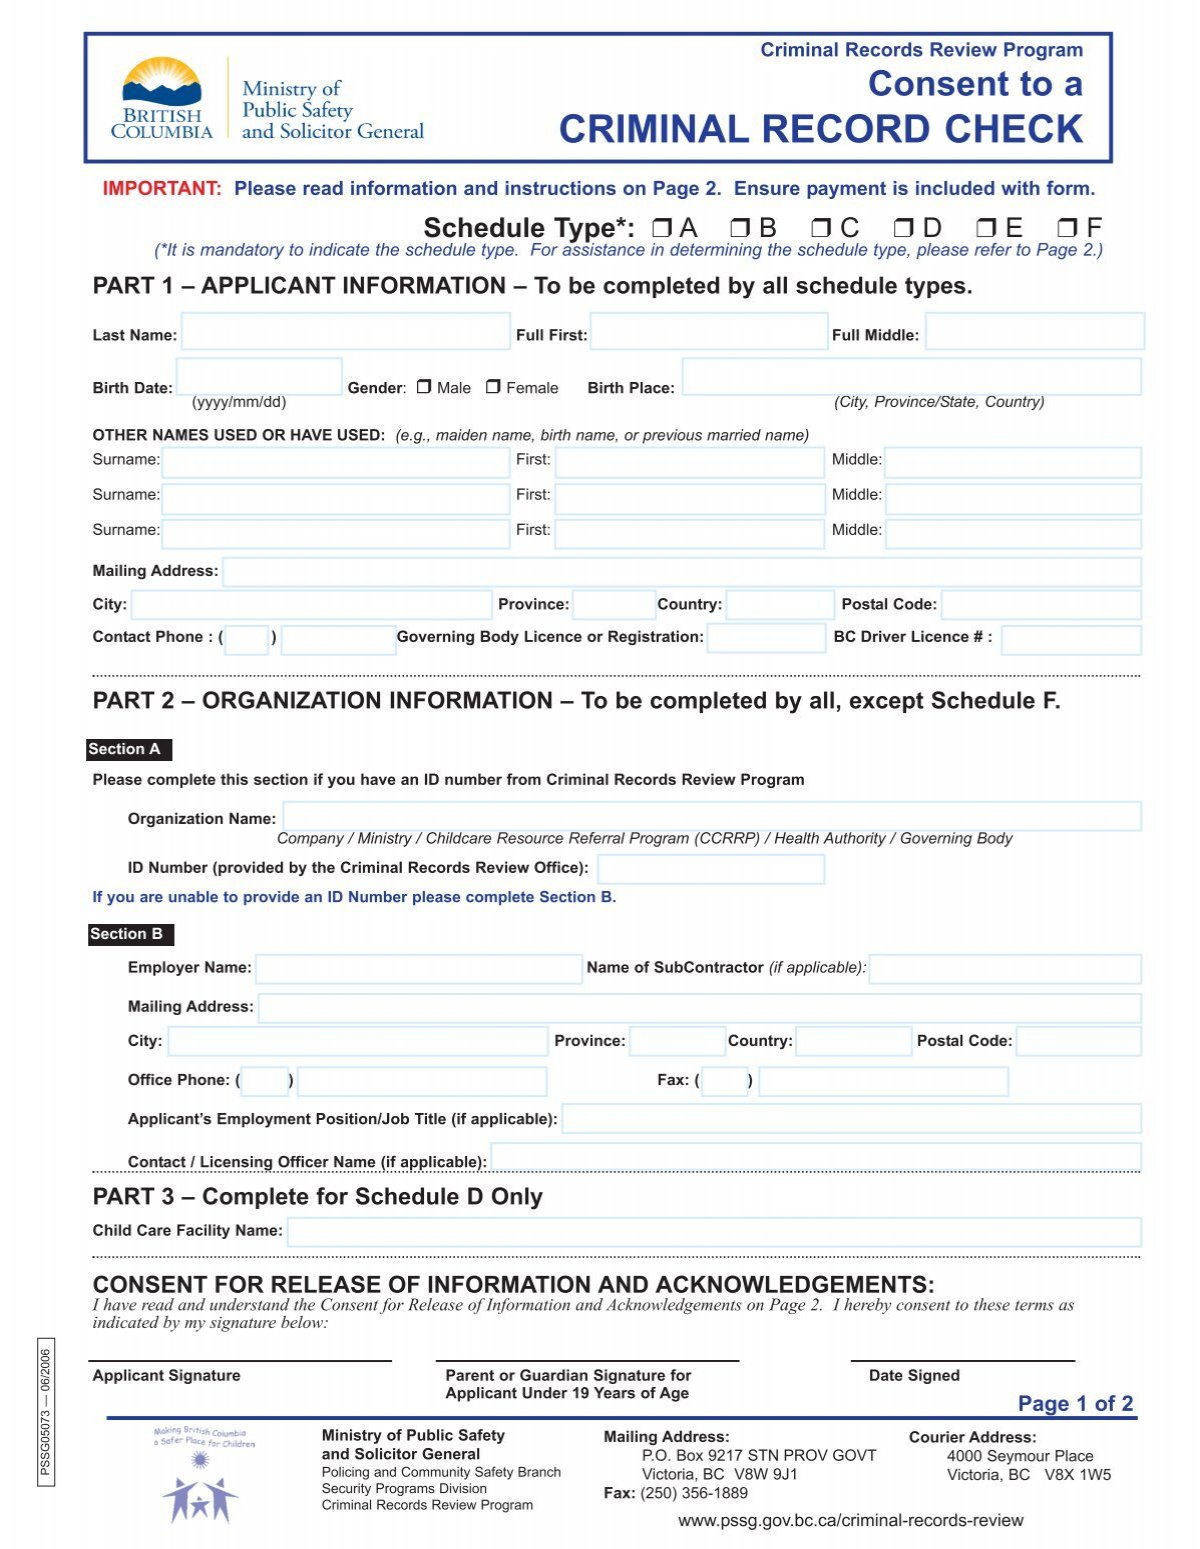 Consent To A Criminal Record Check Form 6976